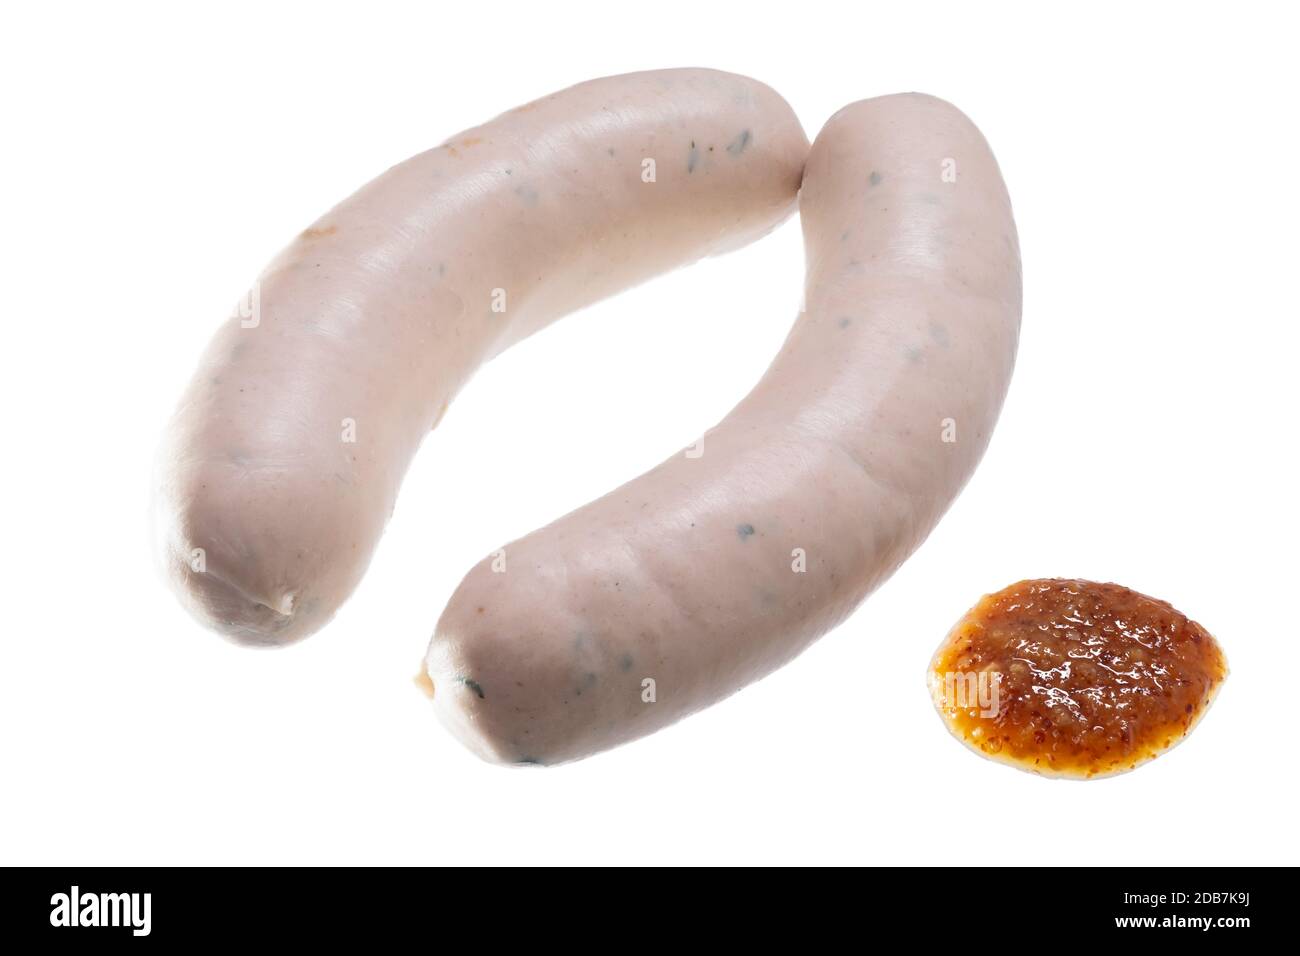 Bavarian veal sausages with mustard close up Stock Photo